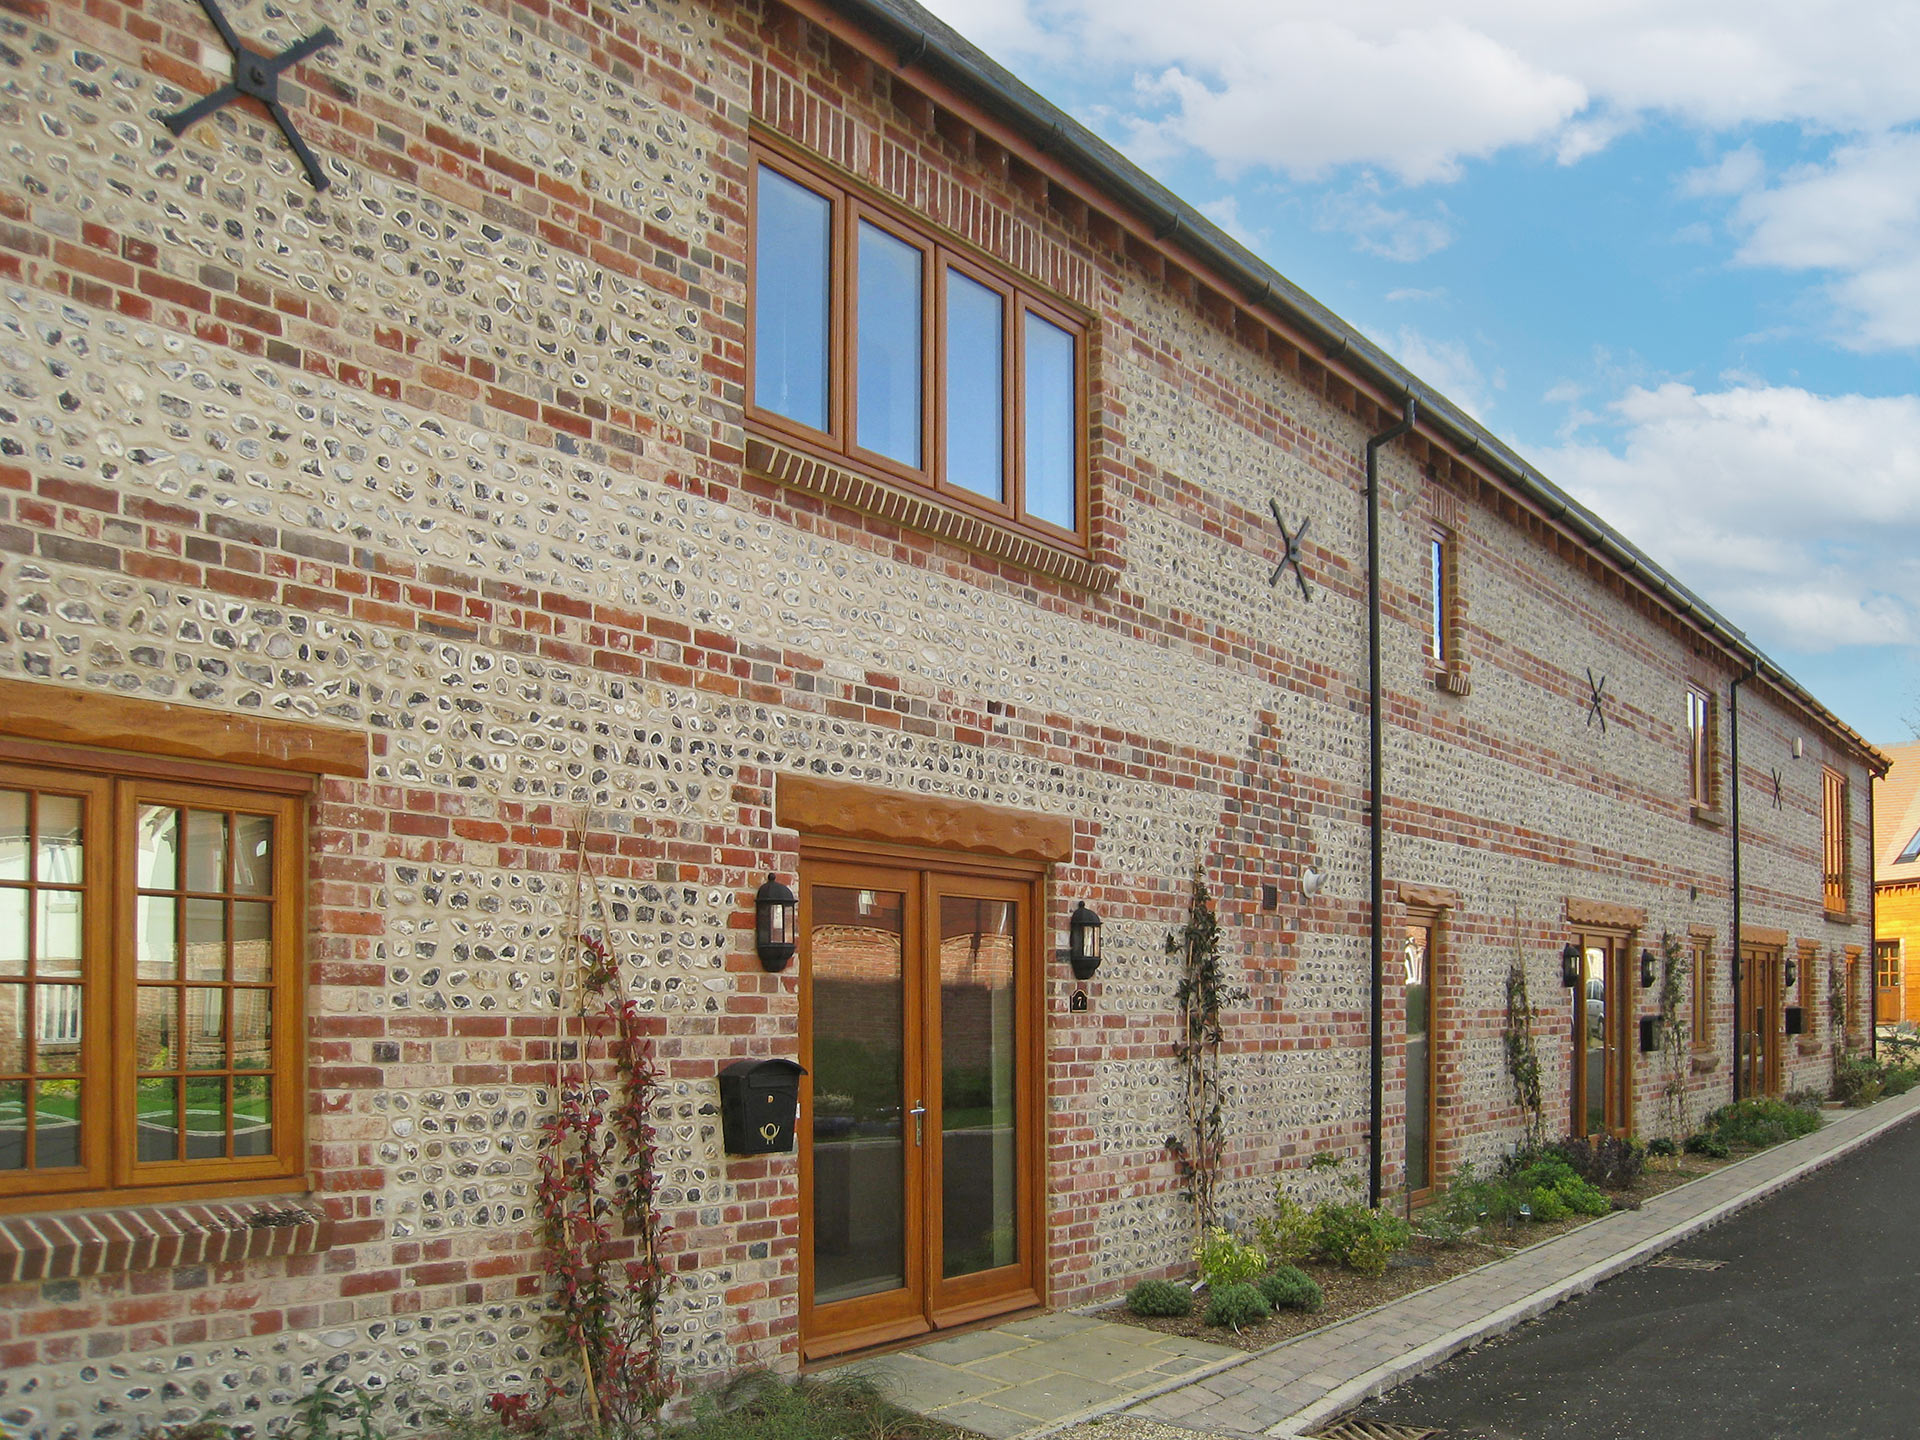 large barn conversion into terraced houses with stone walls